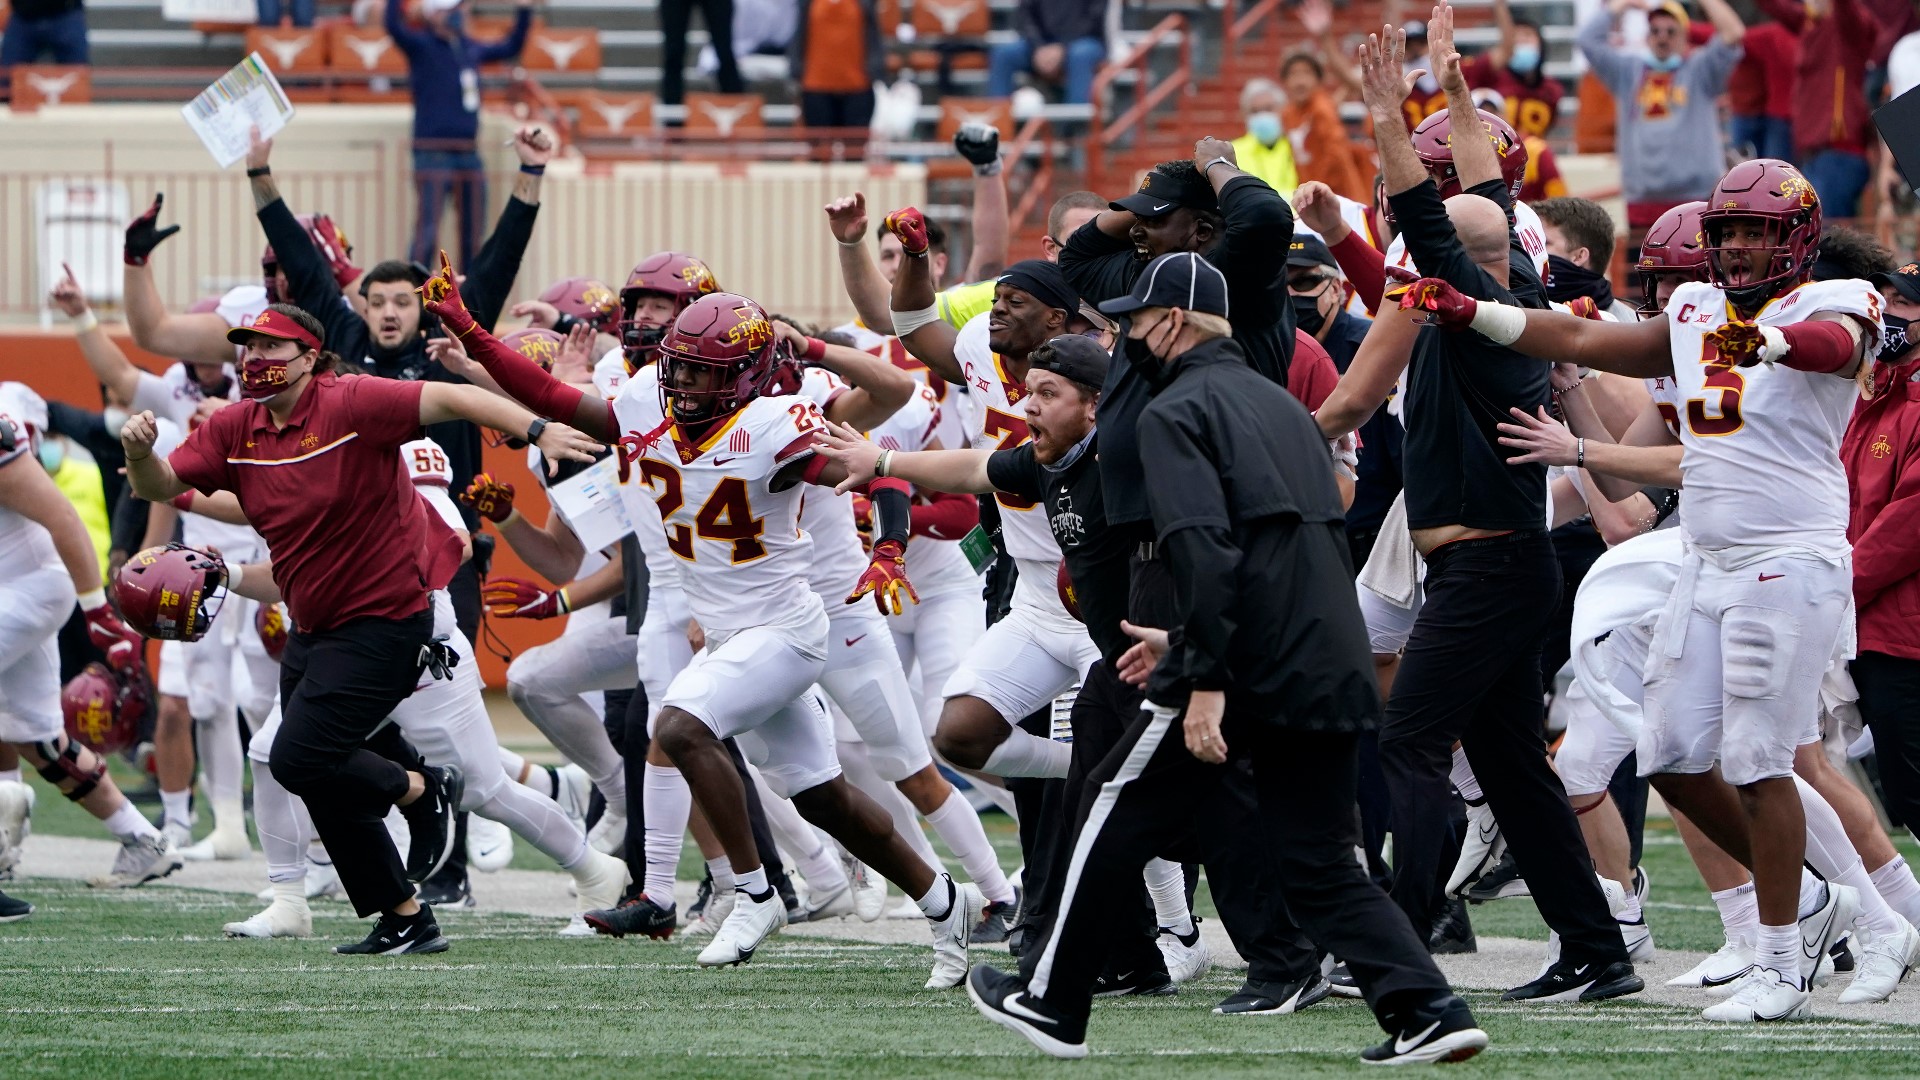 The Cyclones, now 7-2, took a giant step Saturday towards December's Big 12 title game.